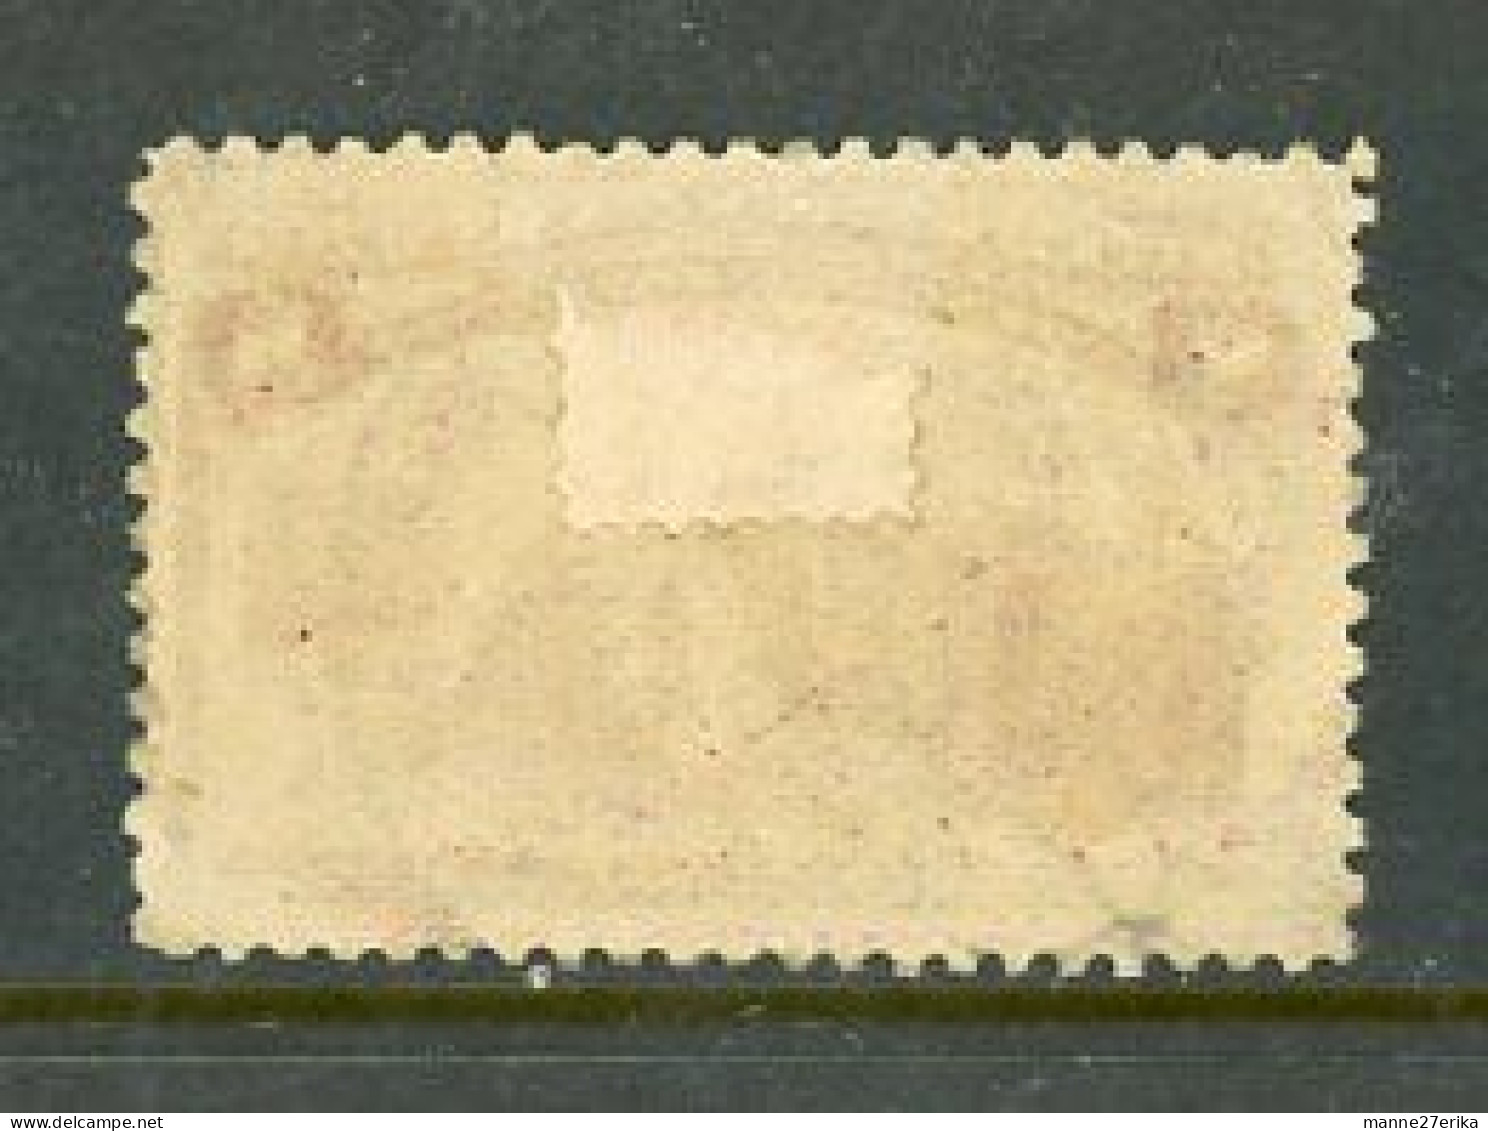 -USA-"1893-"Columbus Restored To Favor" USED - Used Stamps